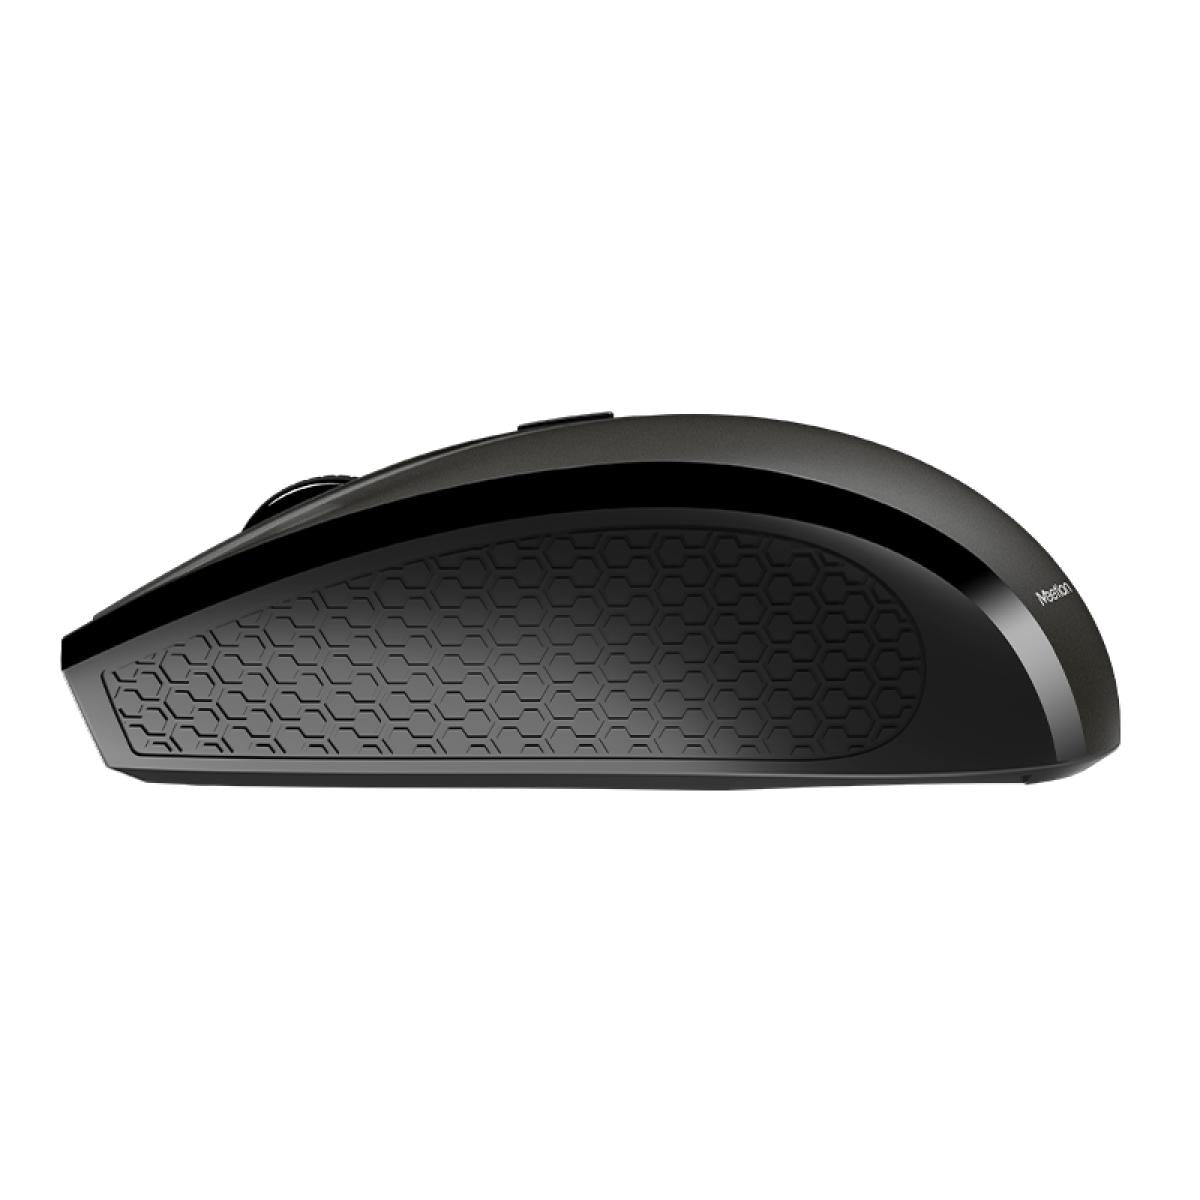 MeeTion 2.4G Wireless Mouse Laptop Optical Mouse - Black